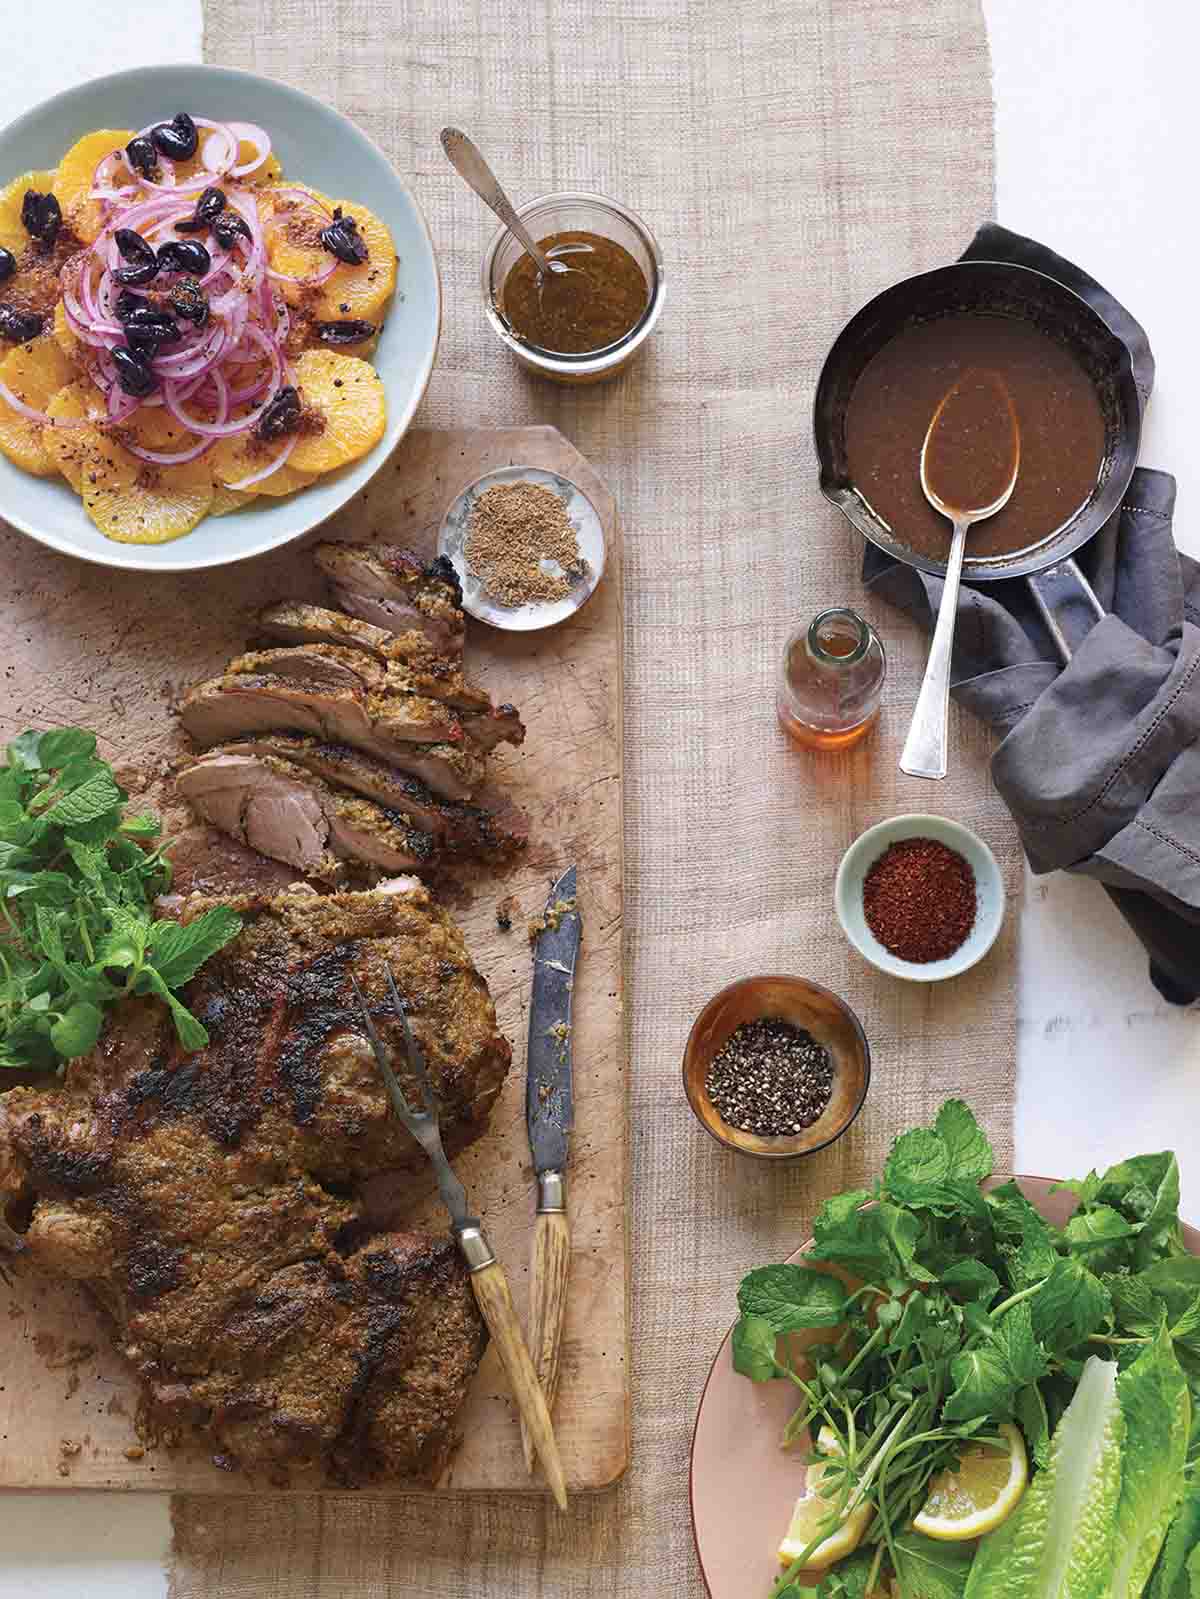 A partially carved roast leg of lamb on a wooden cutting board with spices, fresh herbs, and citrus salad surrounding it.